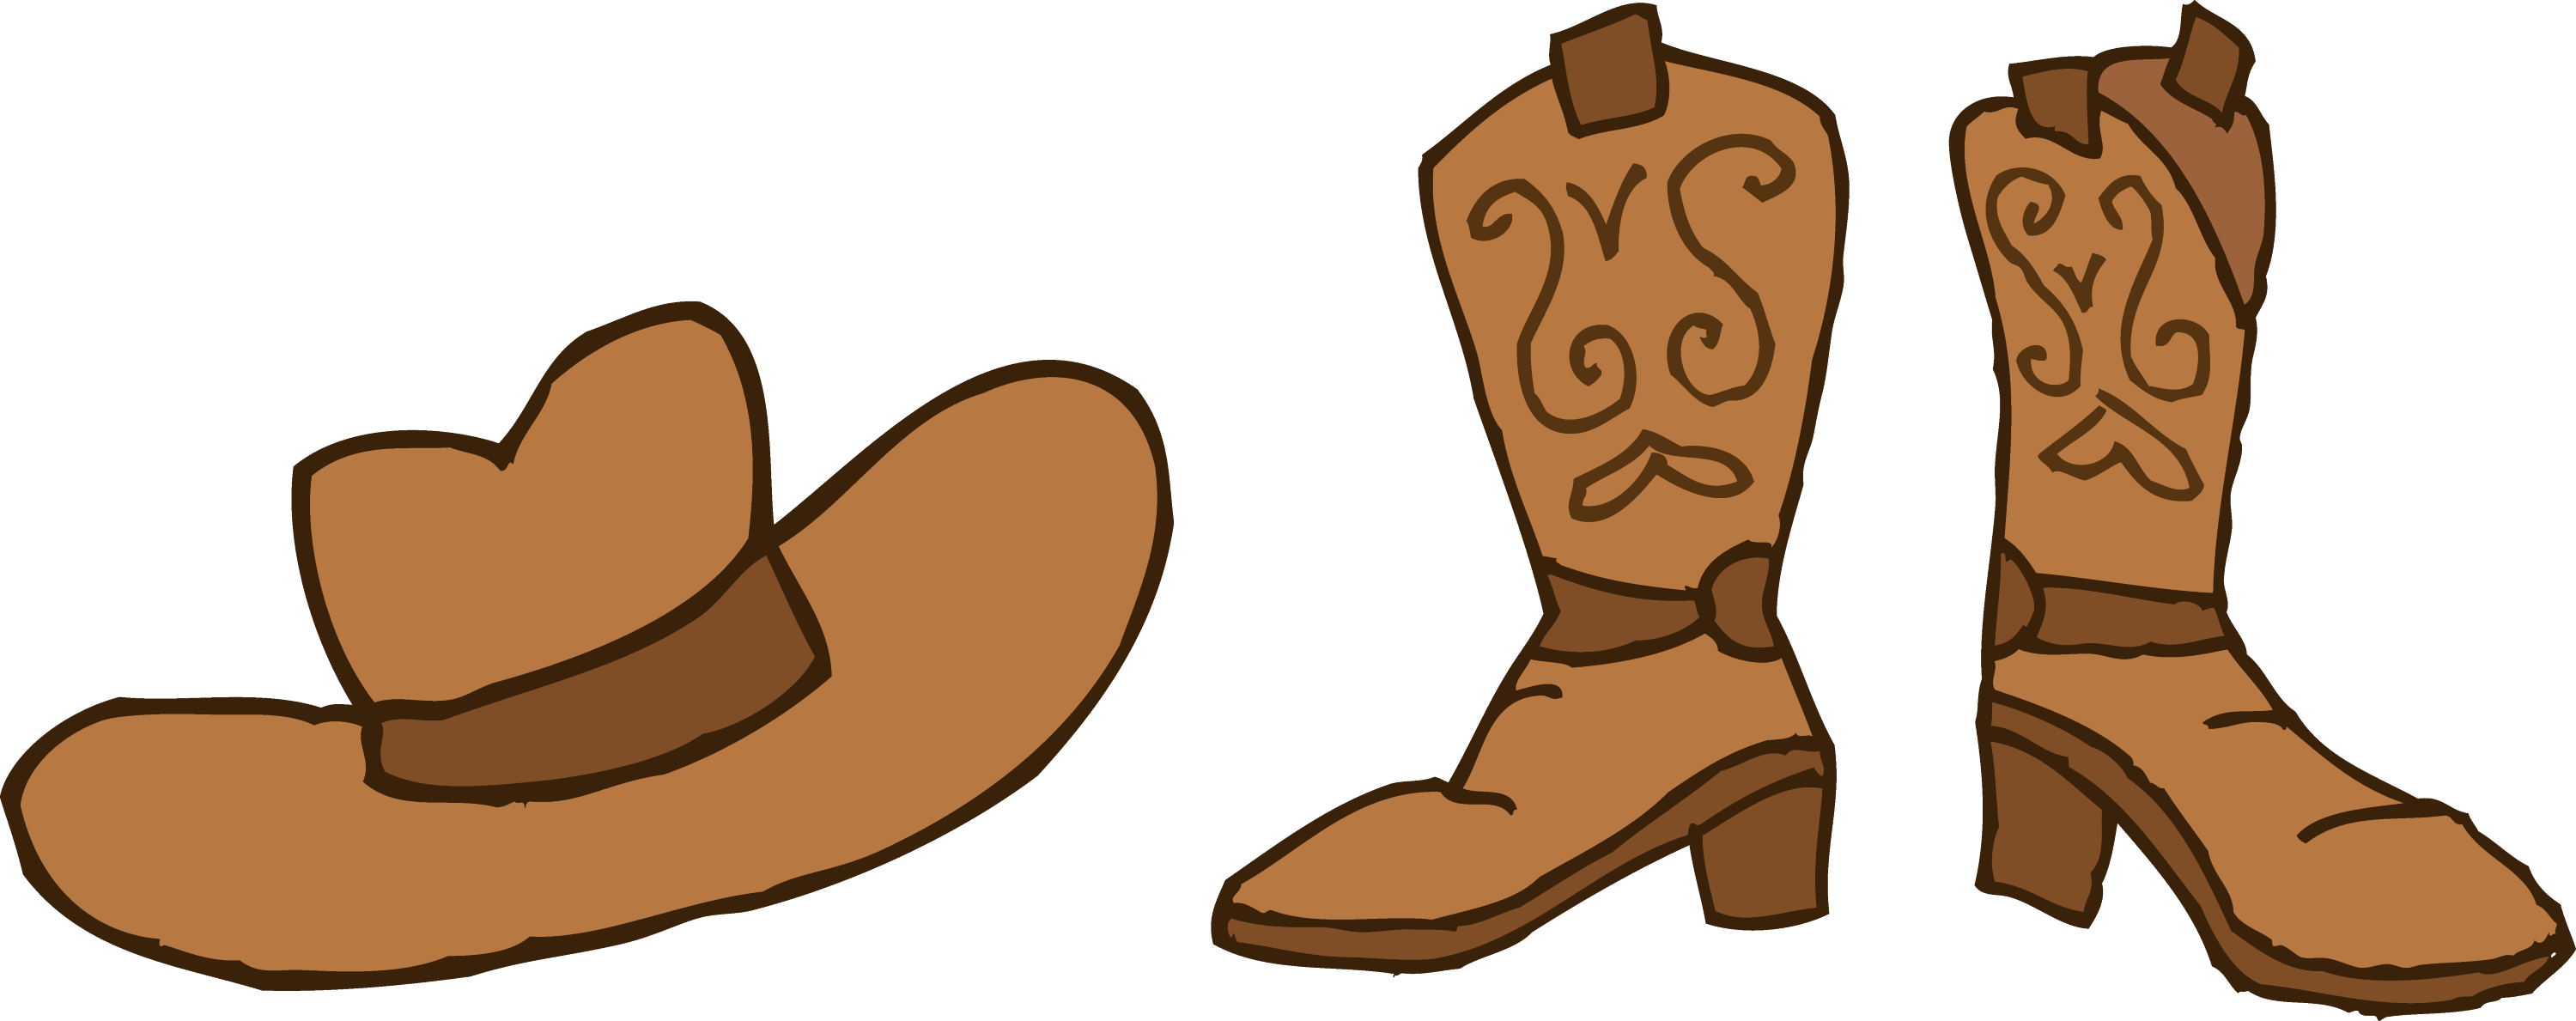 clipart cowgirl boots - photo #34